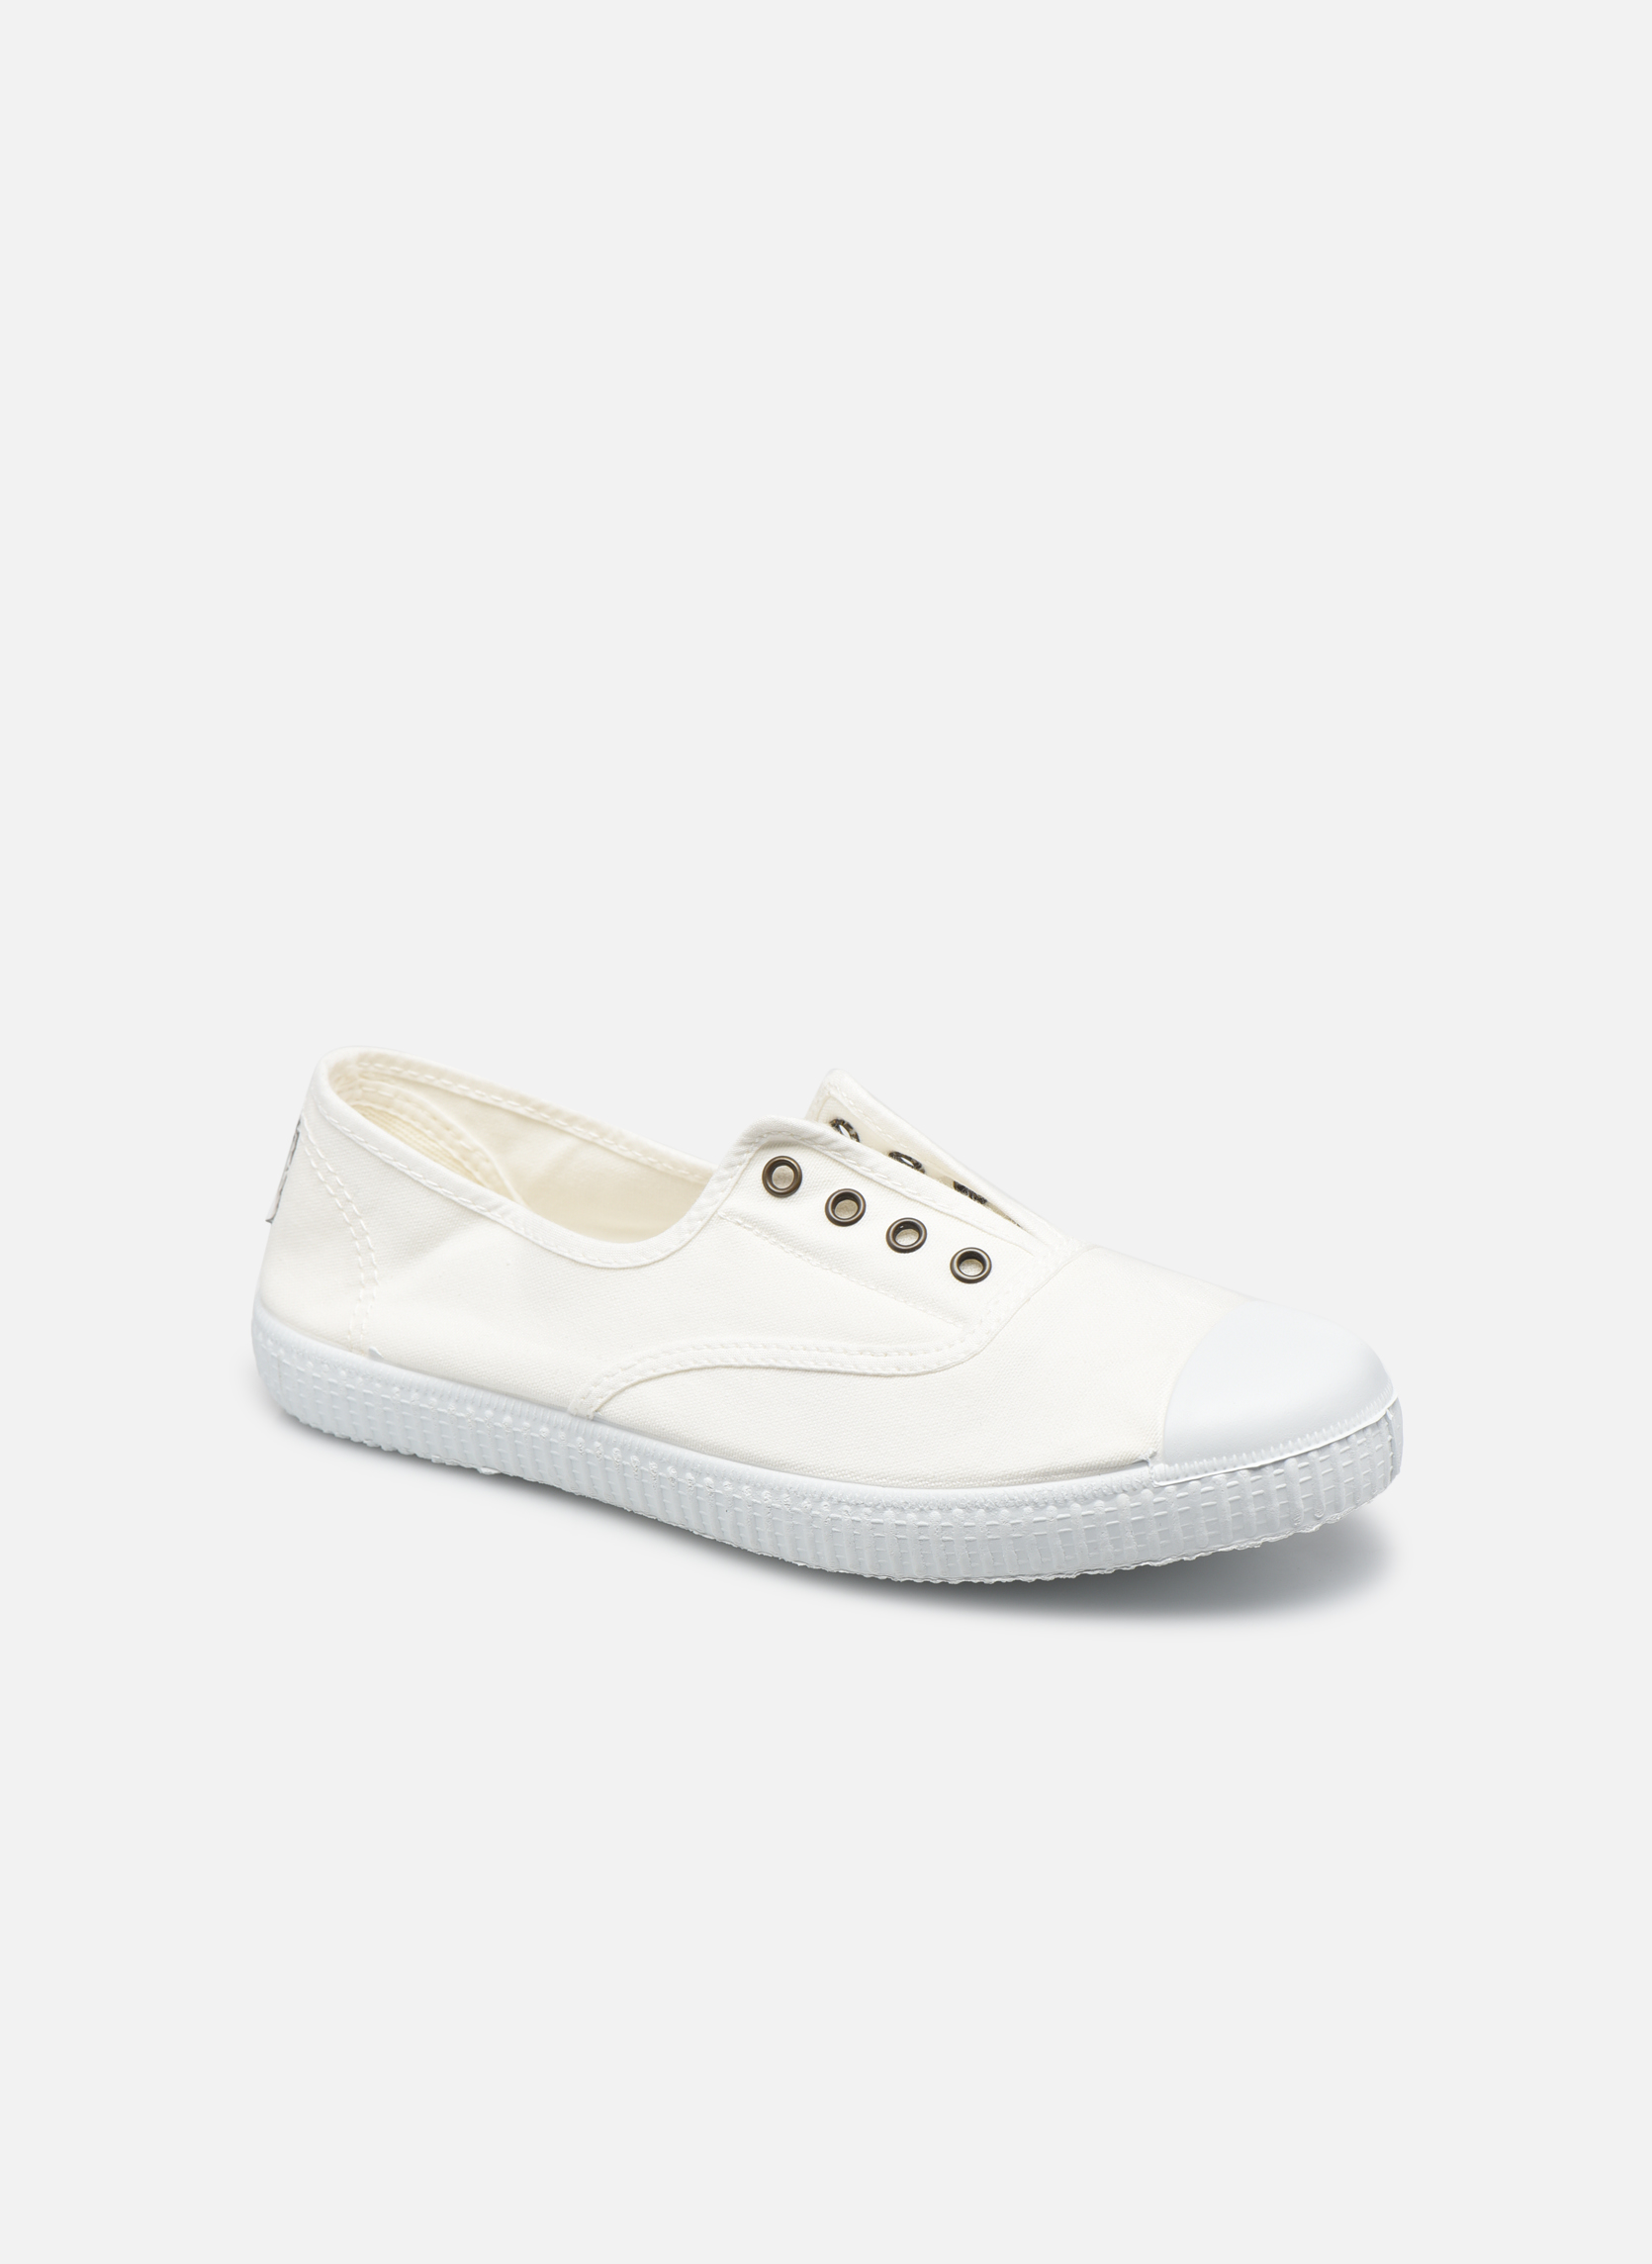 Victoria | Shoes online from Victoria